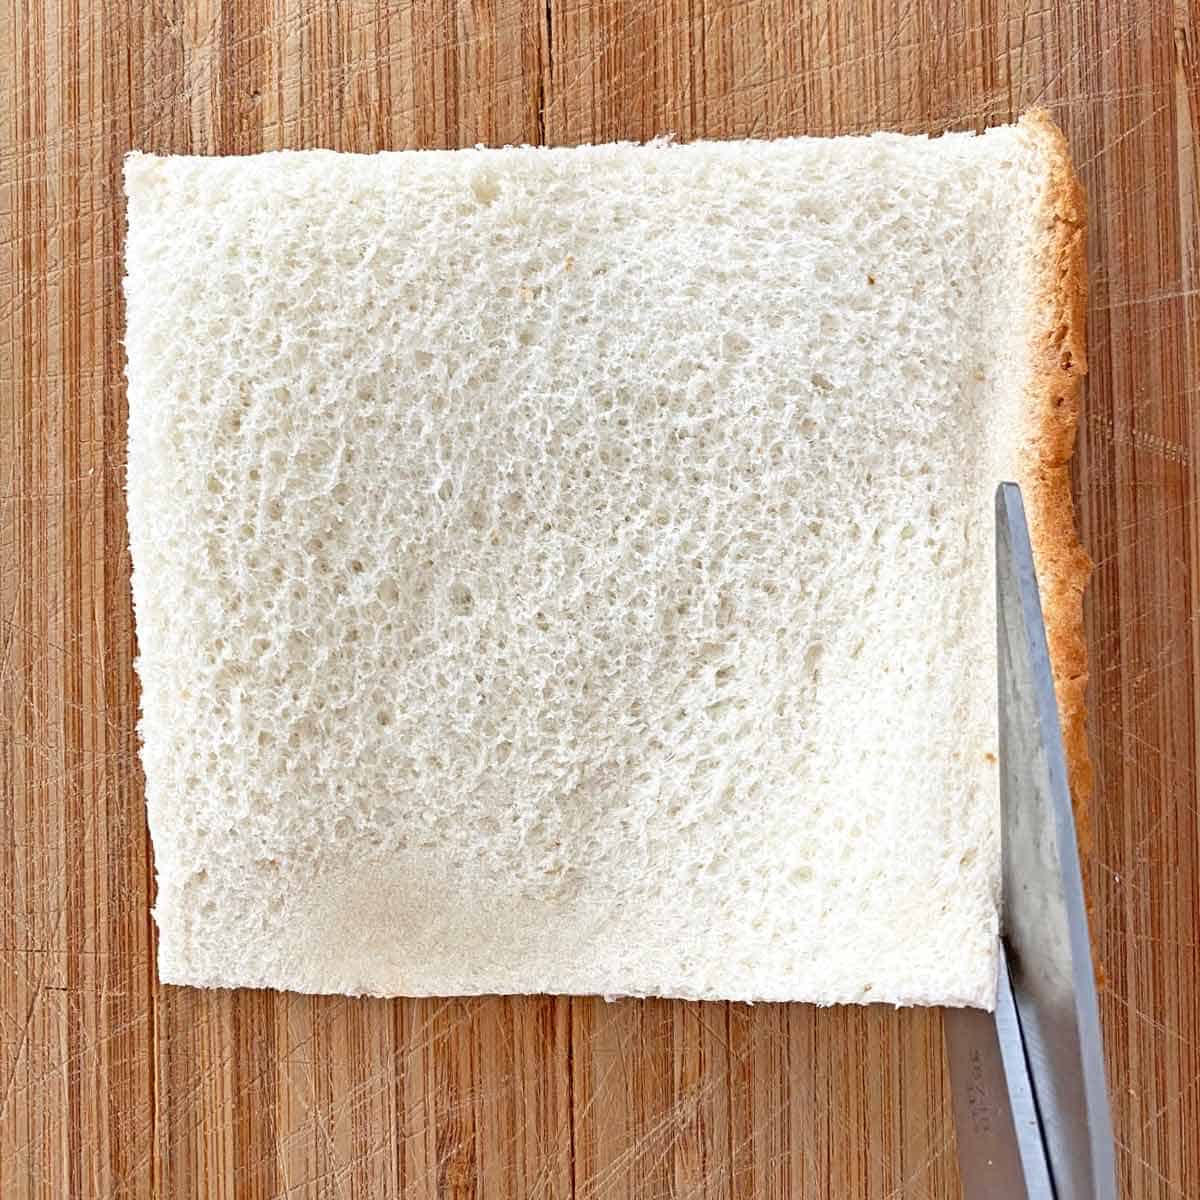 Cutting crusts off a flattened piece of bread with kitchen scissors.